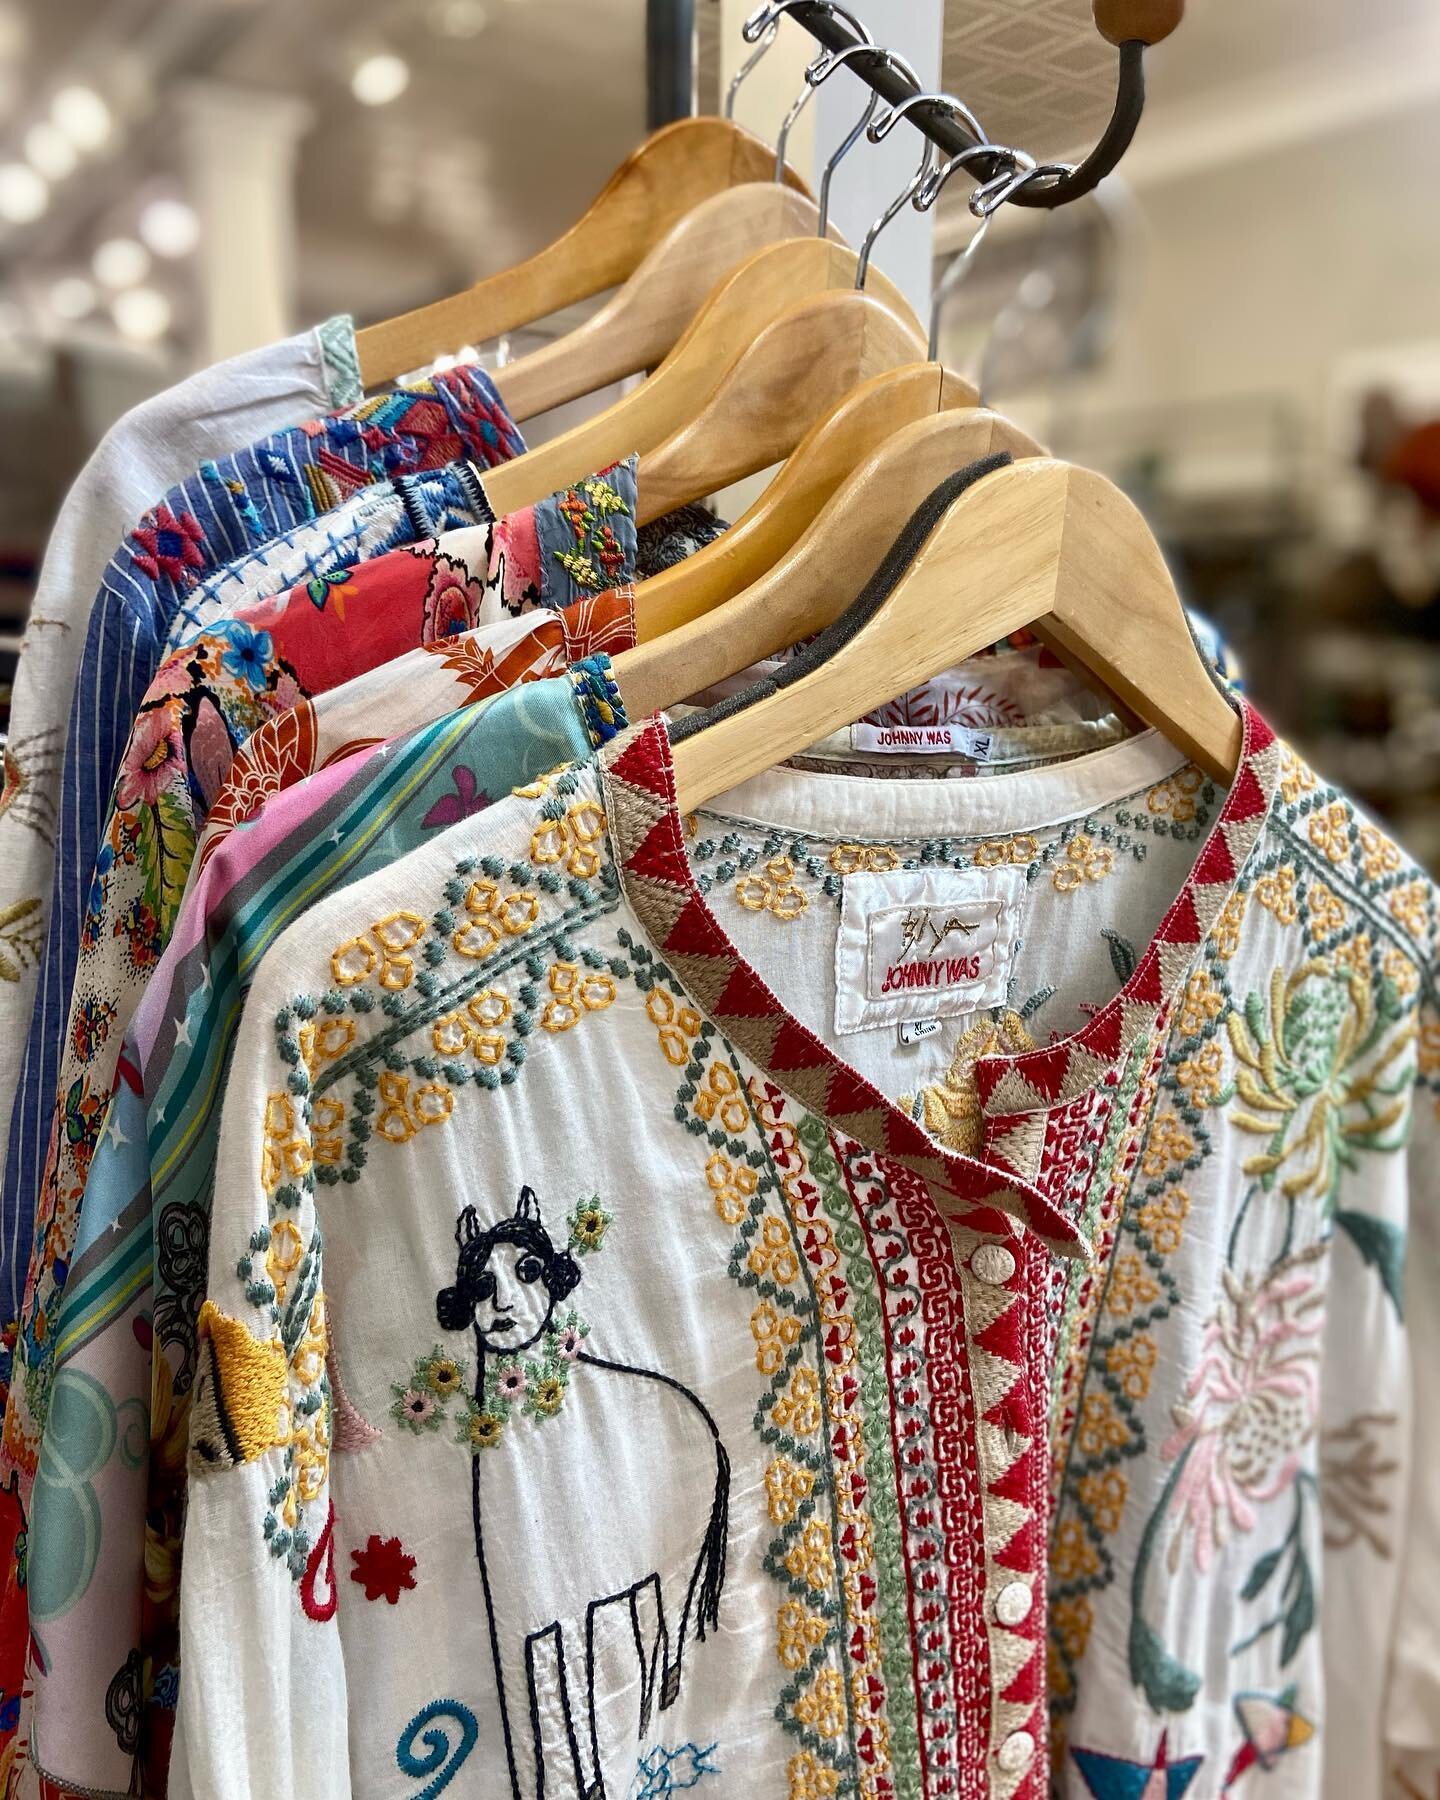 New arrivals daily! ✨ Stop by today and check out our new Johnny Was arrivals!🤩 We are open until 8pm! 
&bull;
&bull;
&bull; 
For inquiries call or email us! 
📞 609-924-1997
📧 princeton@greenestreet.com

@greenestreetprinceton is not affiliated wi